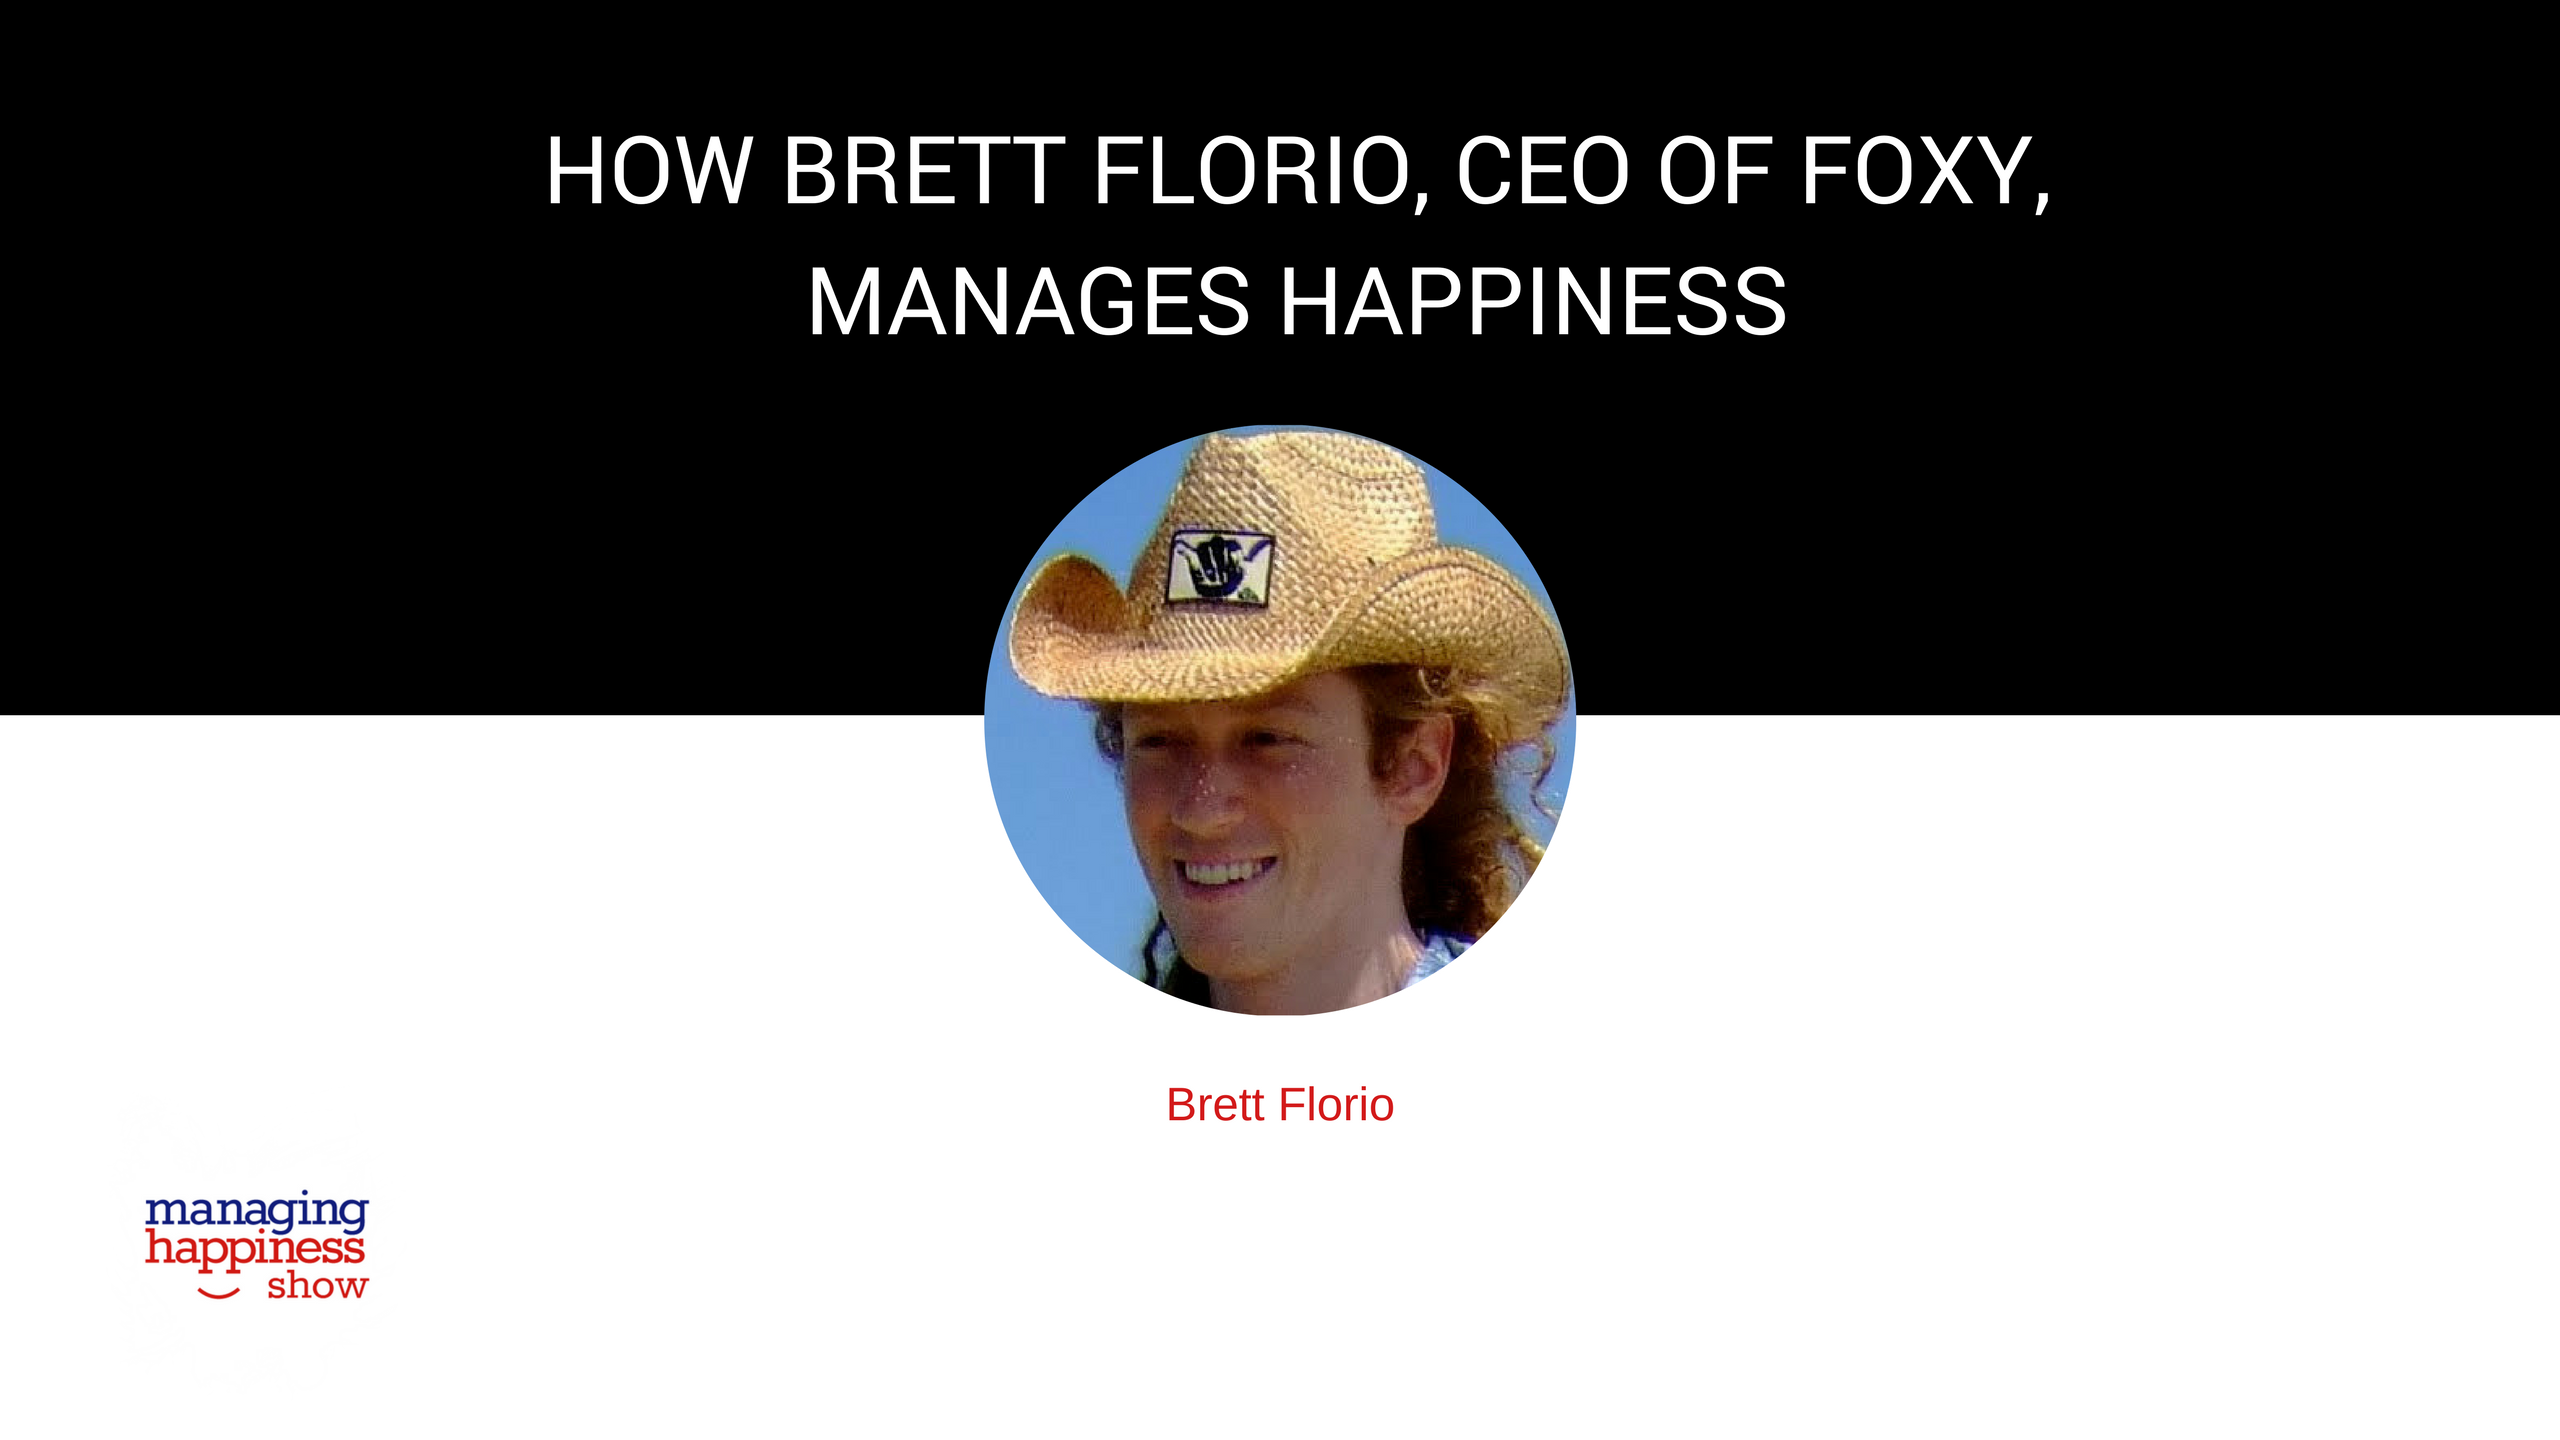 EP. 6: How Brett Florio, CEO of Foxy, is Managing Happiness